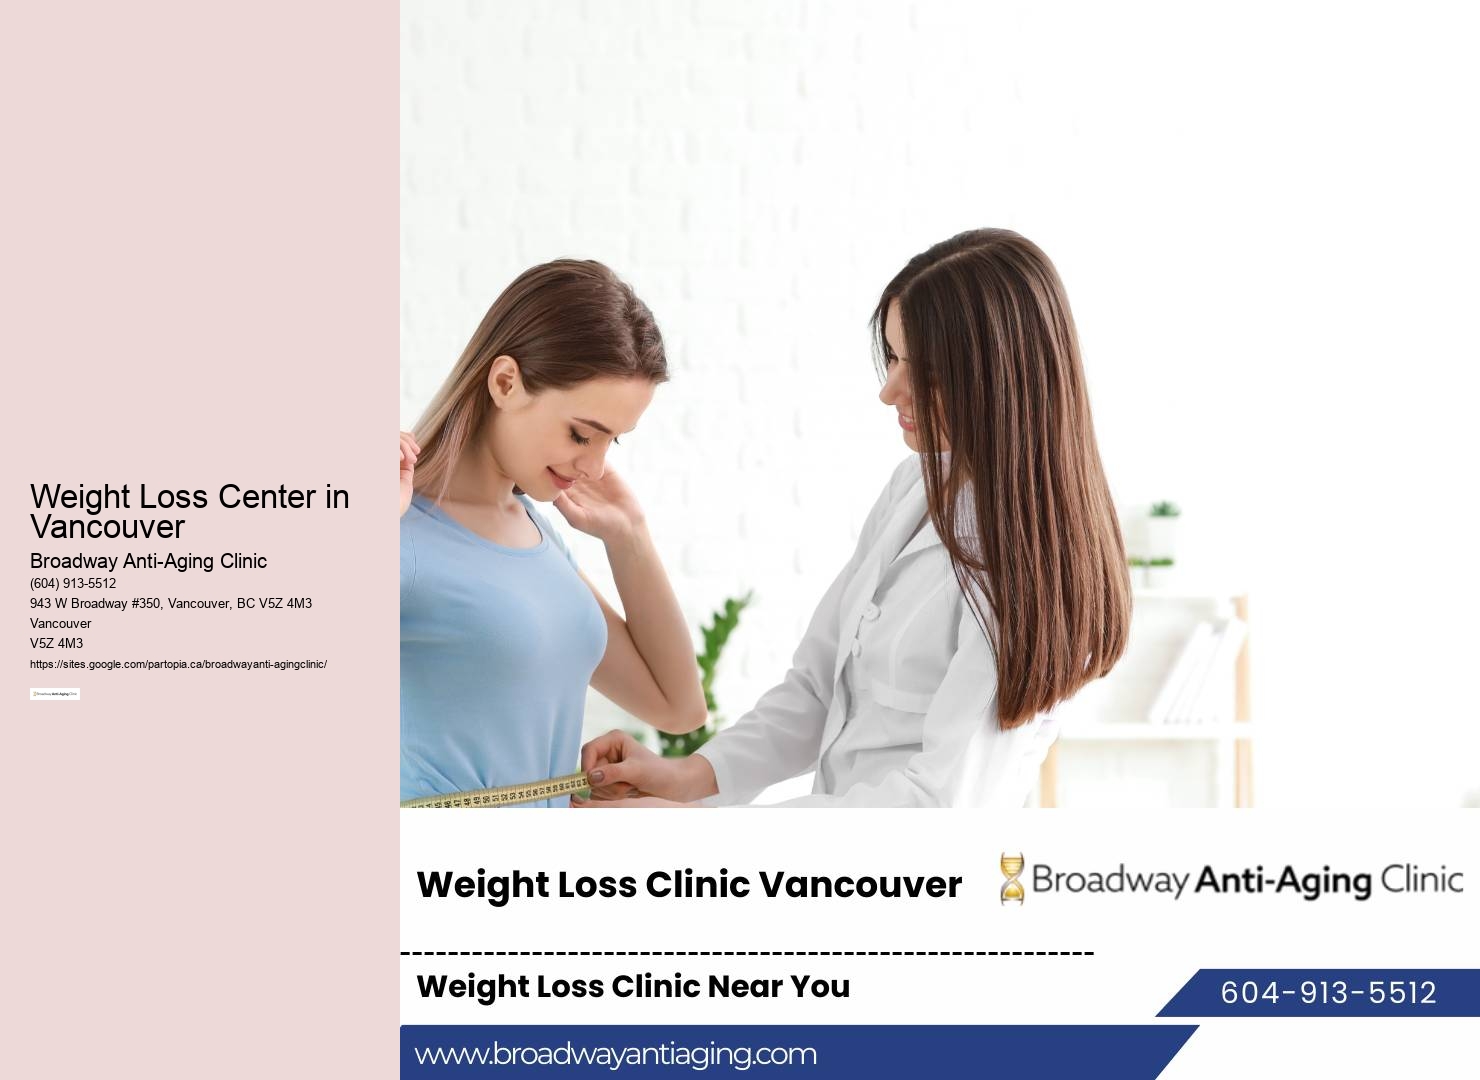 Weight Loss Center in Vancouver